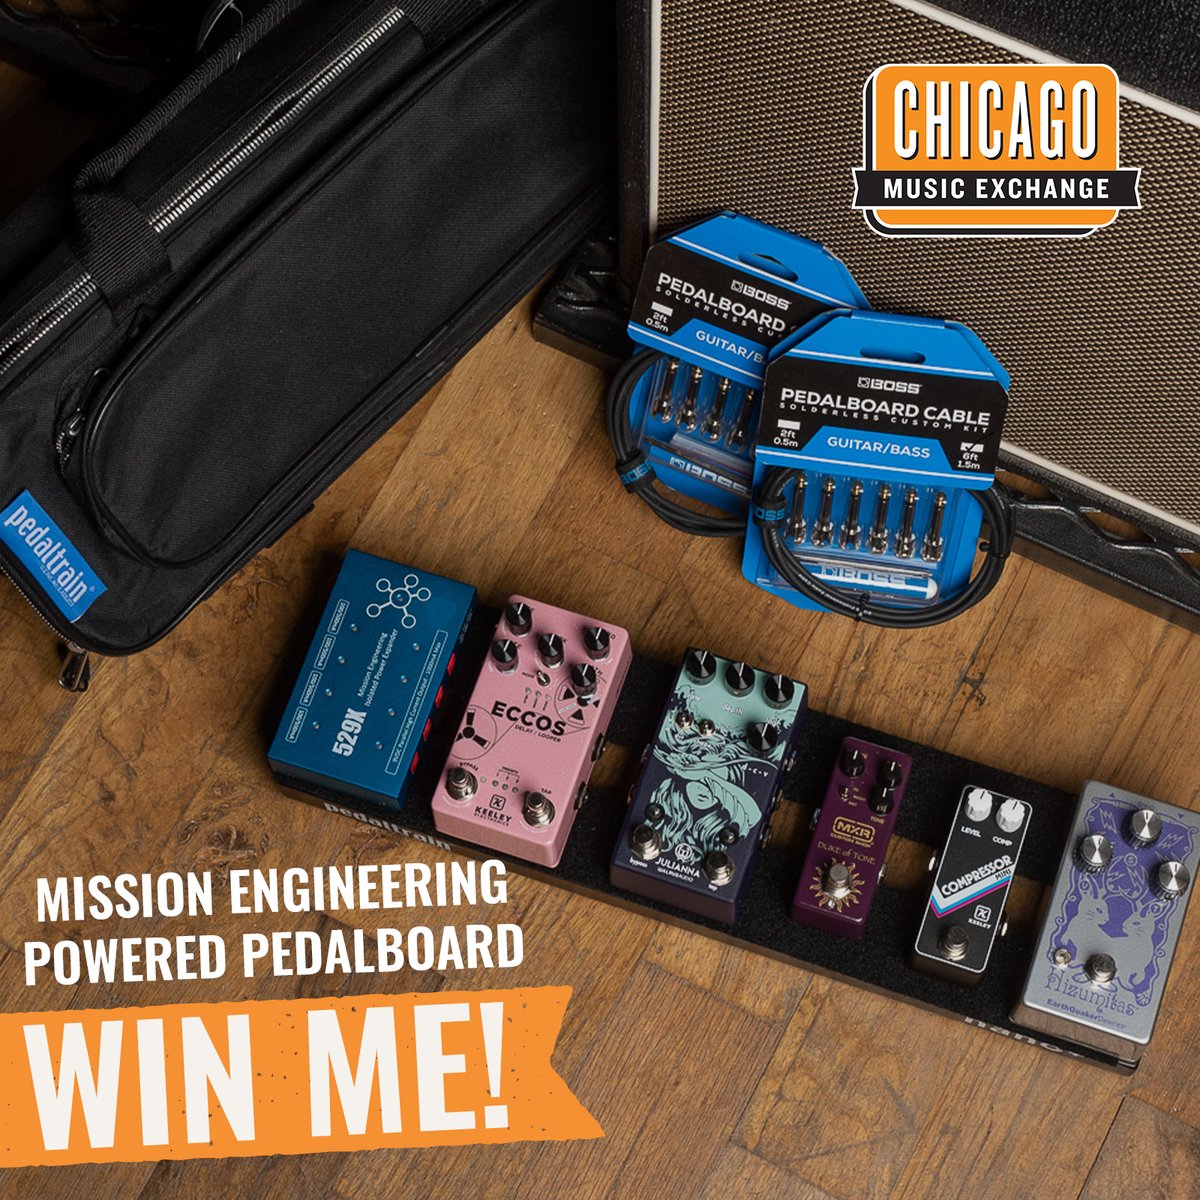 CME has put together an entire pedalboard outfitted with everything a guitar player might need to surf on into a whole new signal chain this summer with CME’s pedalboard giveaway! Enter (before June 30) to win CME’s Pedalboard Giveaway 2023! bit.ly/3dmcUnA #GIVEAWAY